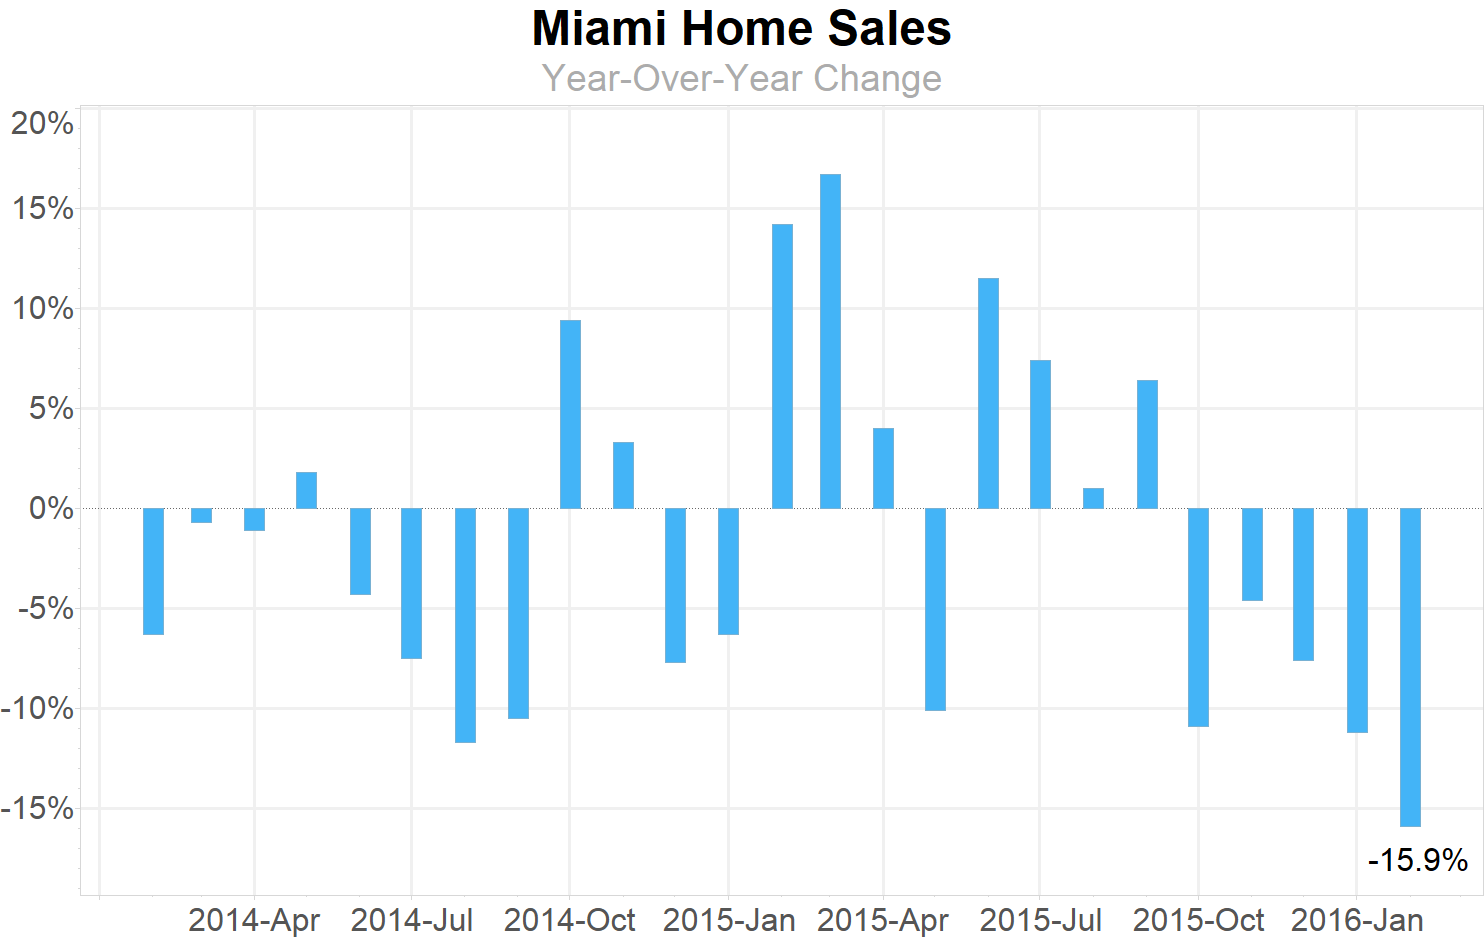 Miami Home Sales Year-Over-Year Change: 5 months of consecutive declines leading to a Correction in the Miami Real Estate Market